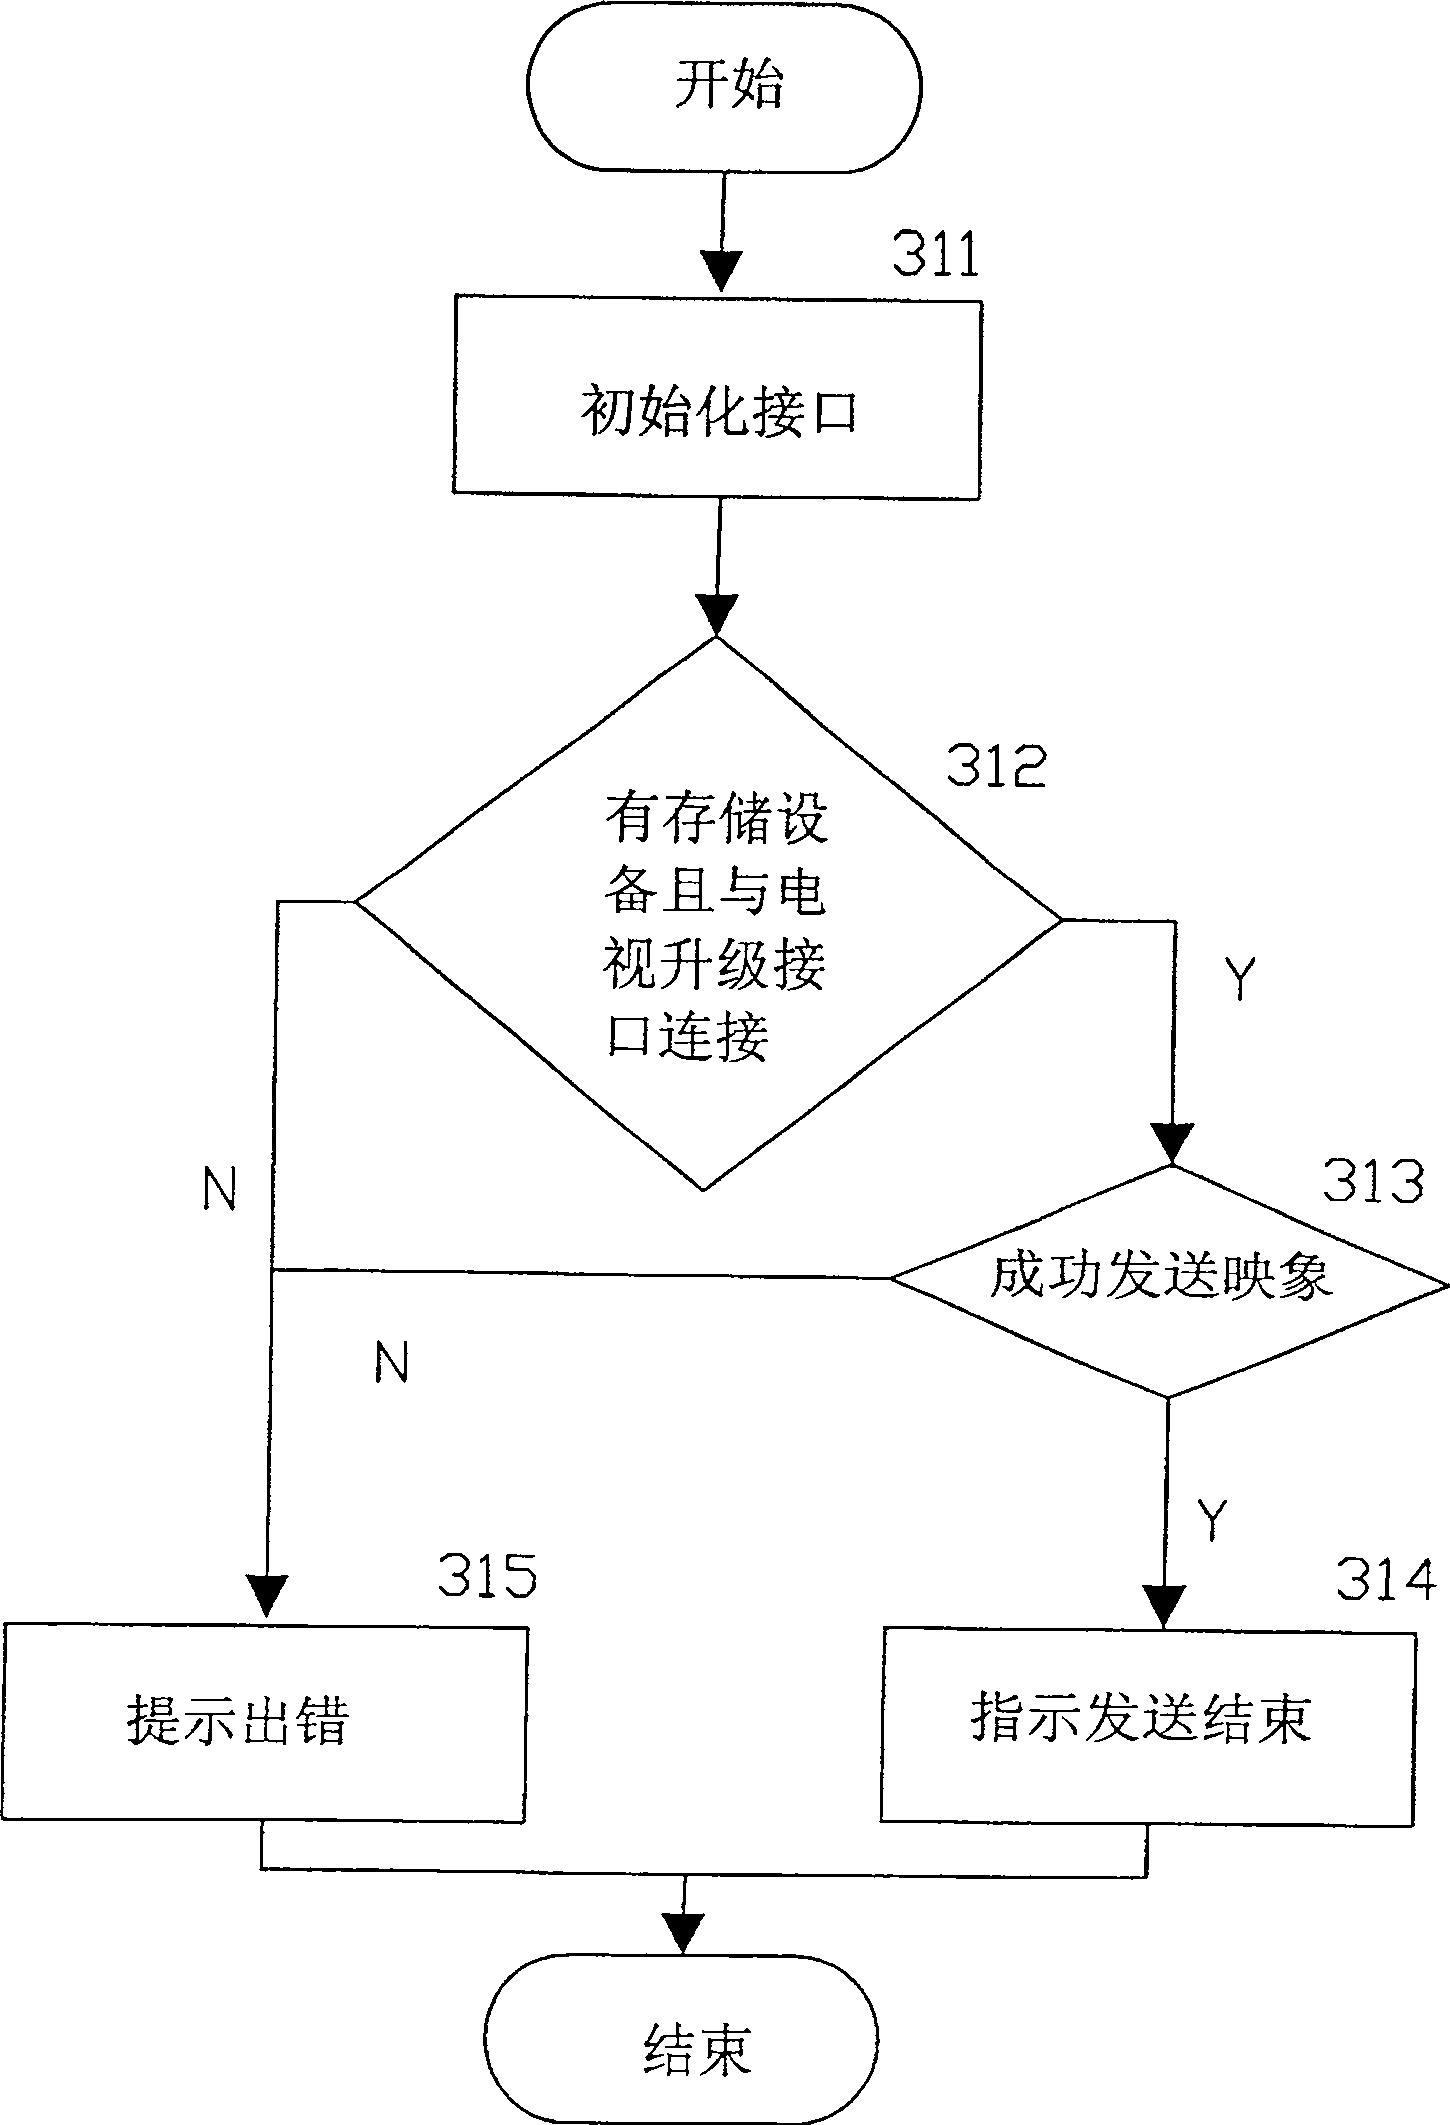 Method and device for carrying out TV set software upgrade